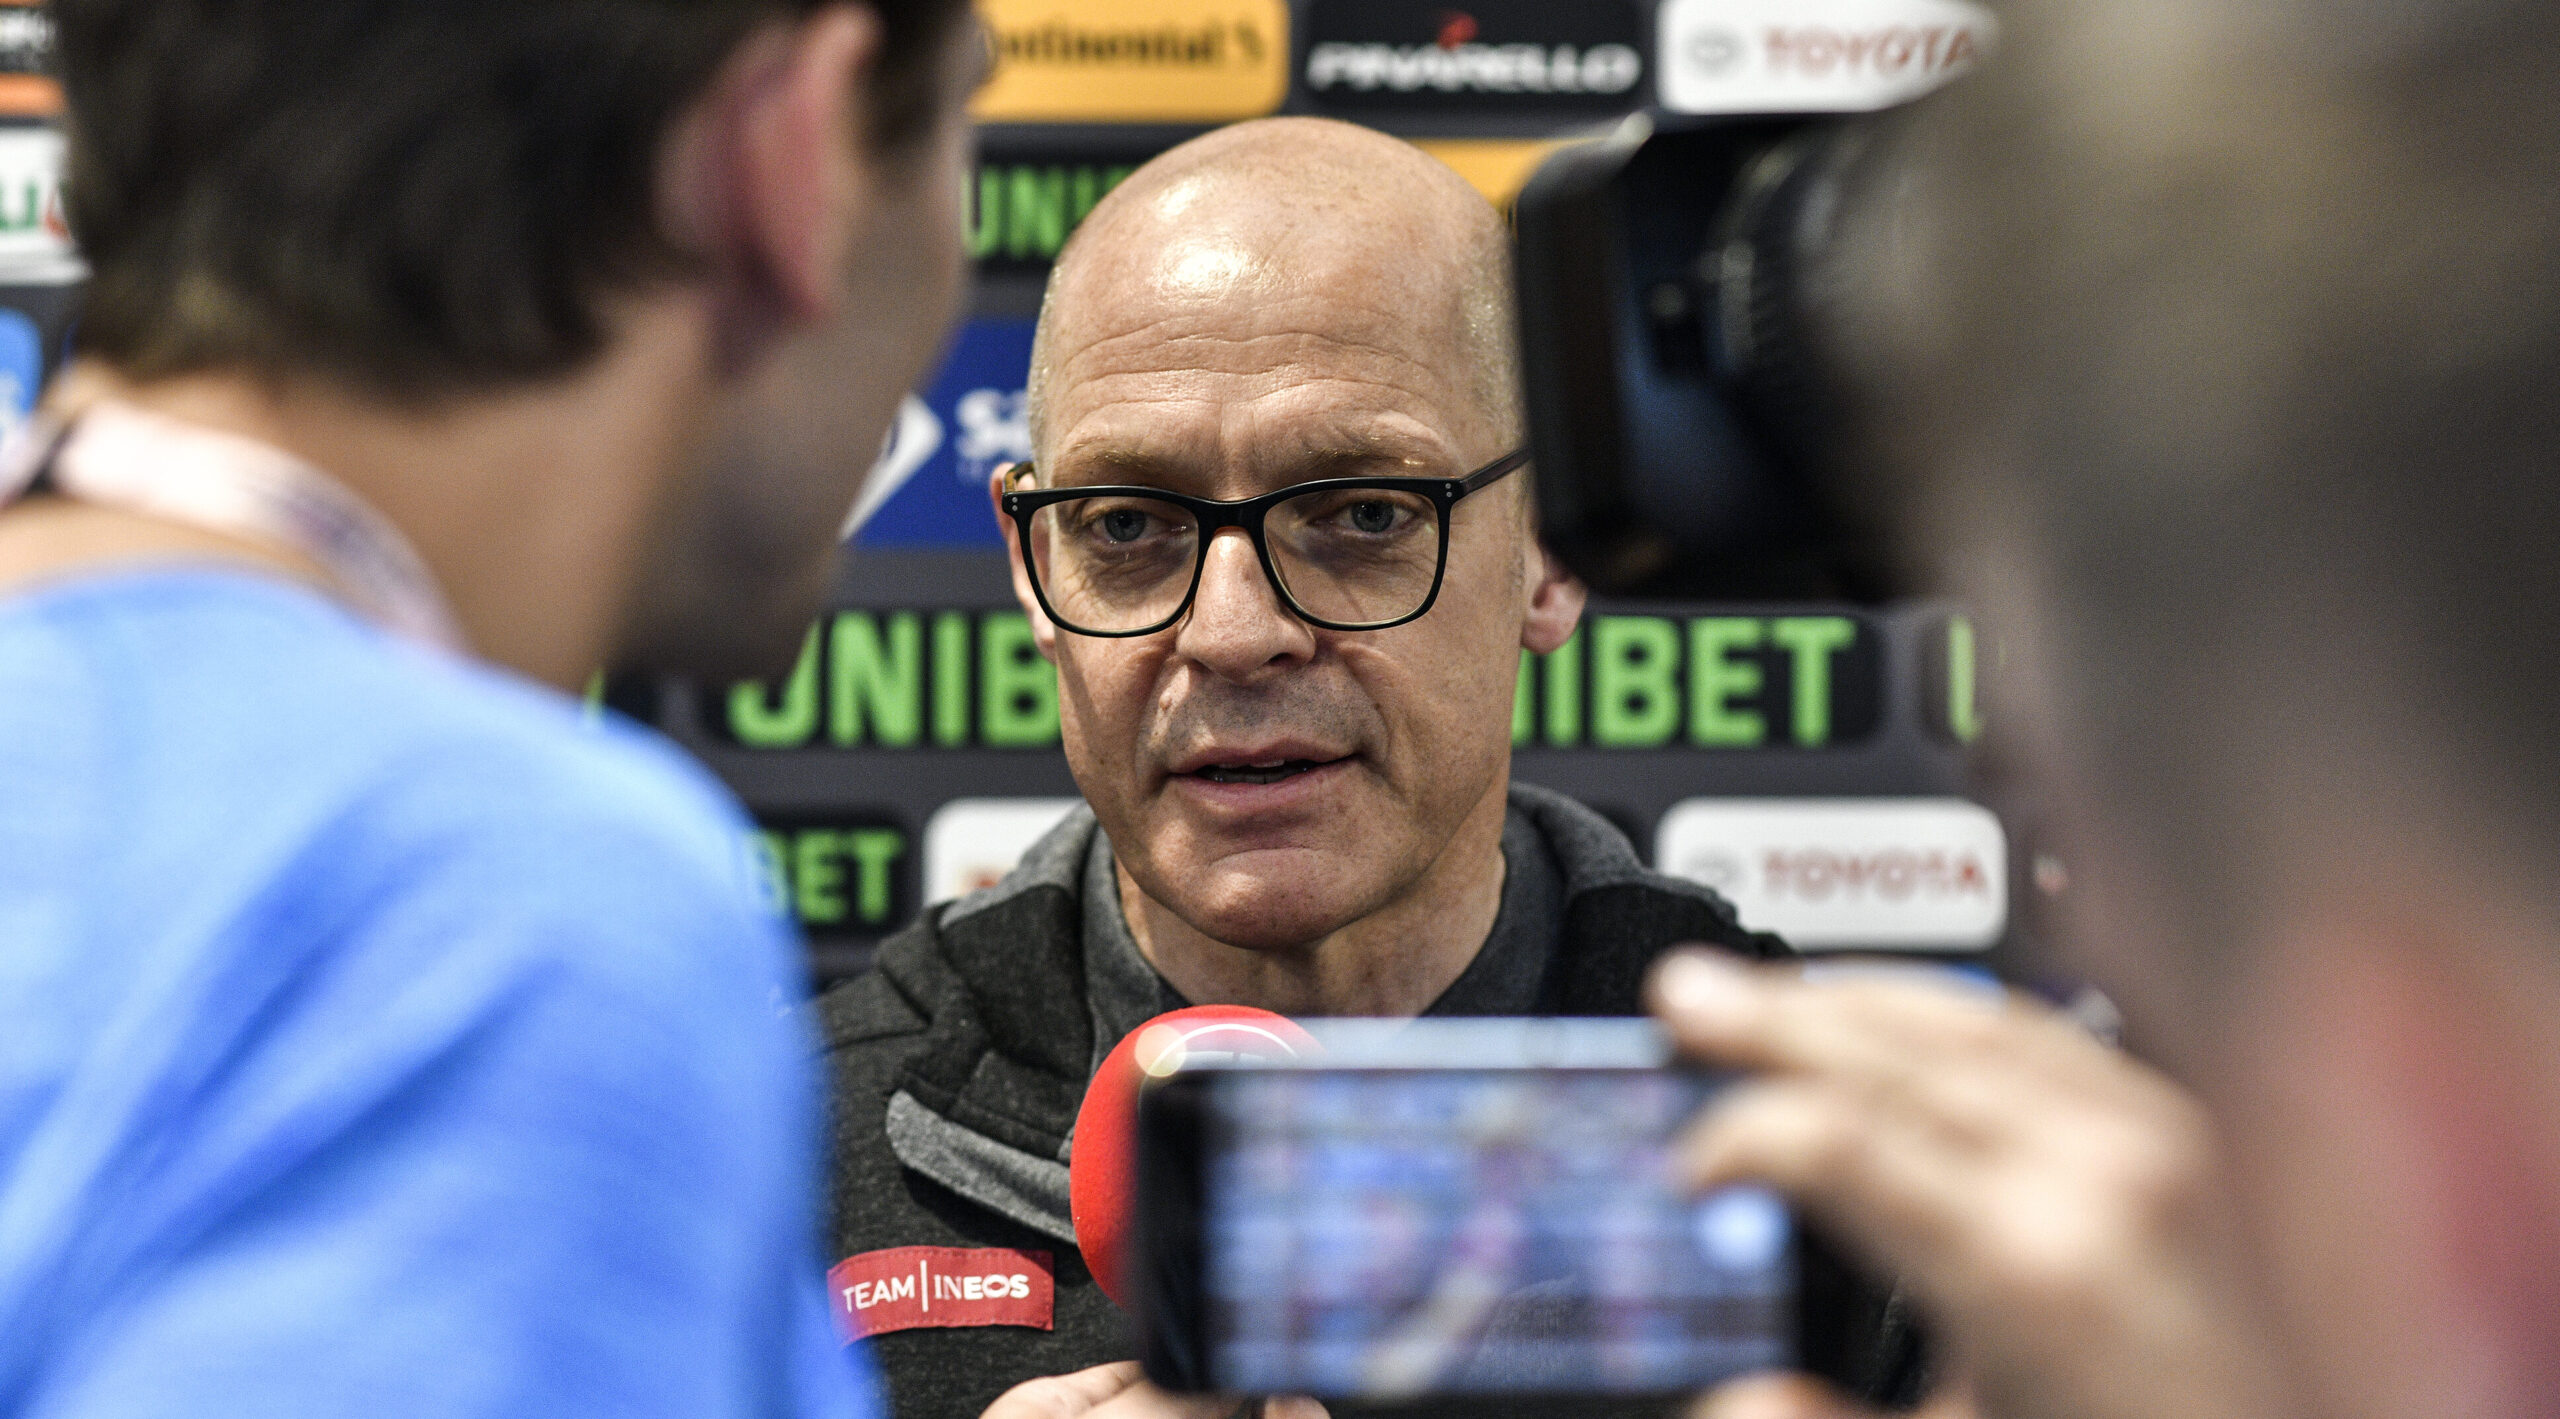 Dave Brailsford resigns from team boss position at Ineos Grenadiers